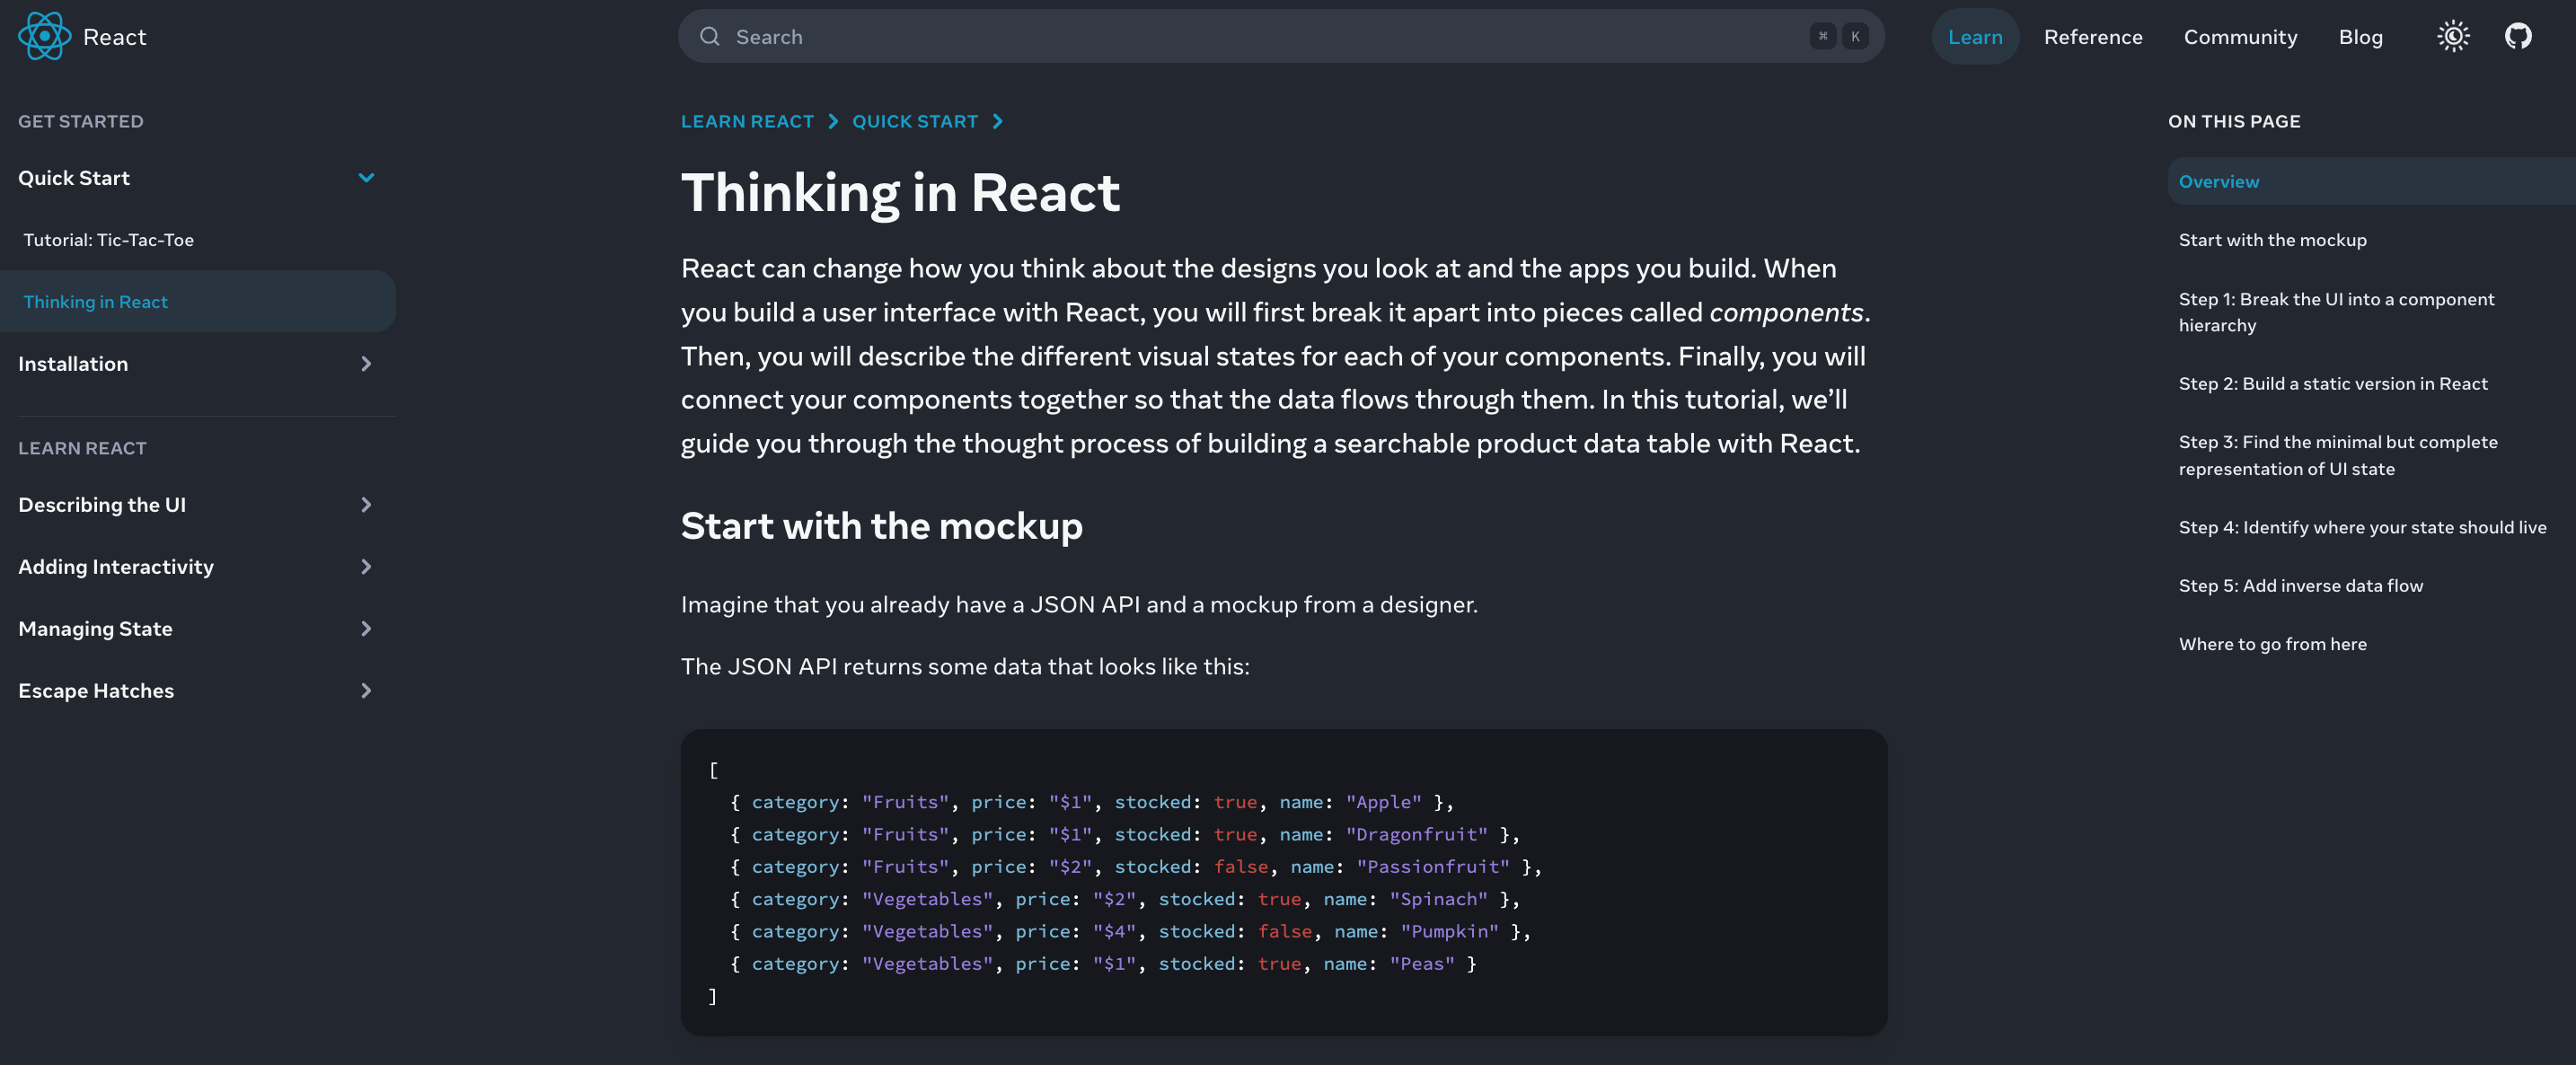 React's "Thinking in React" page